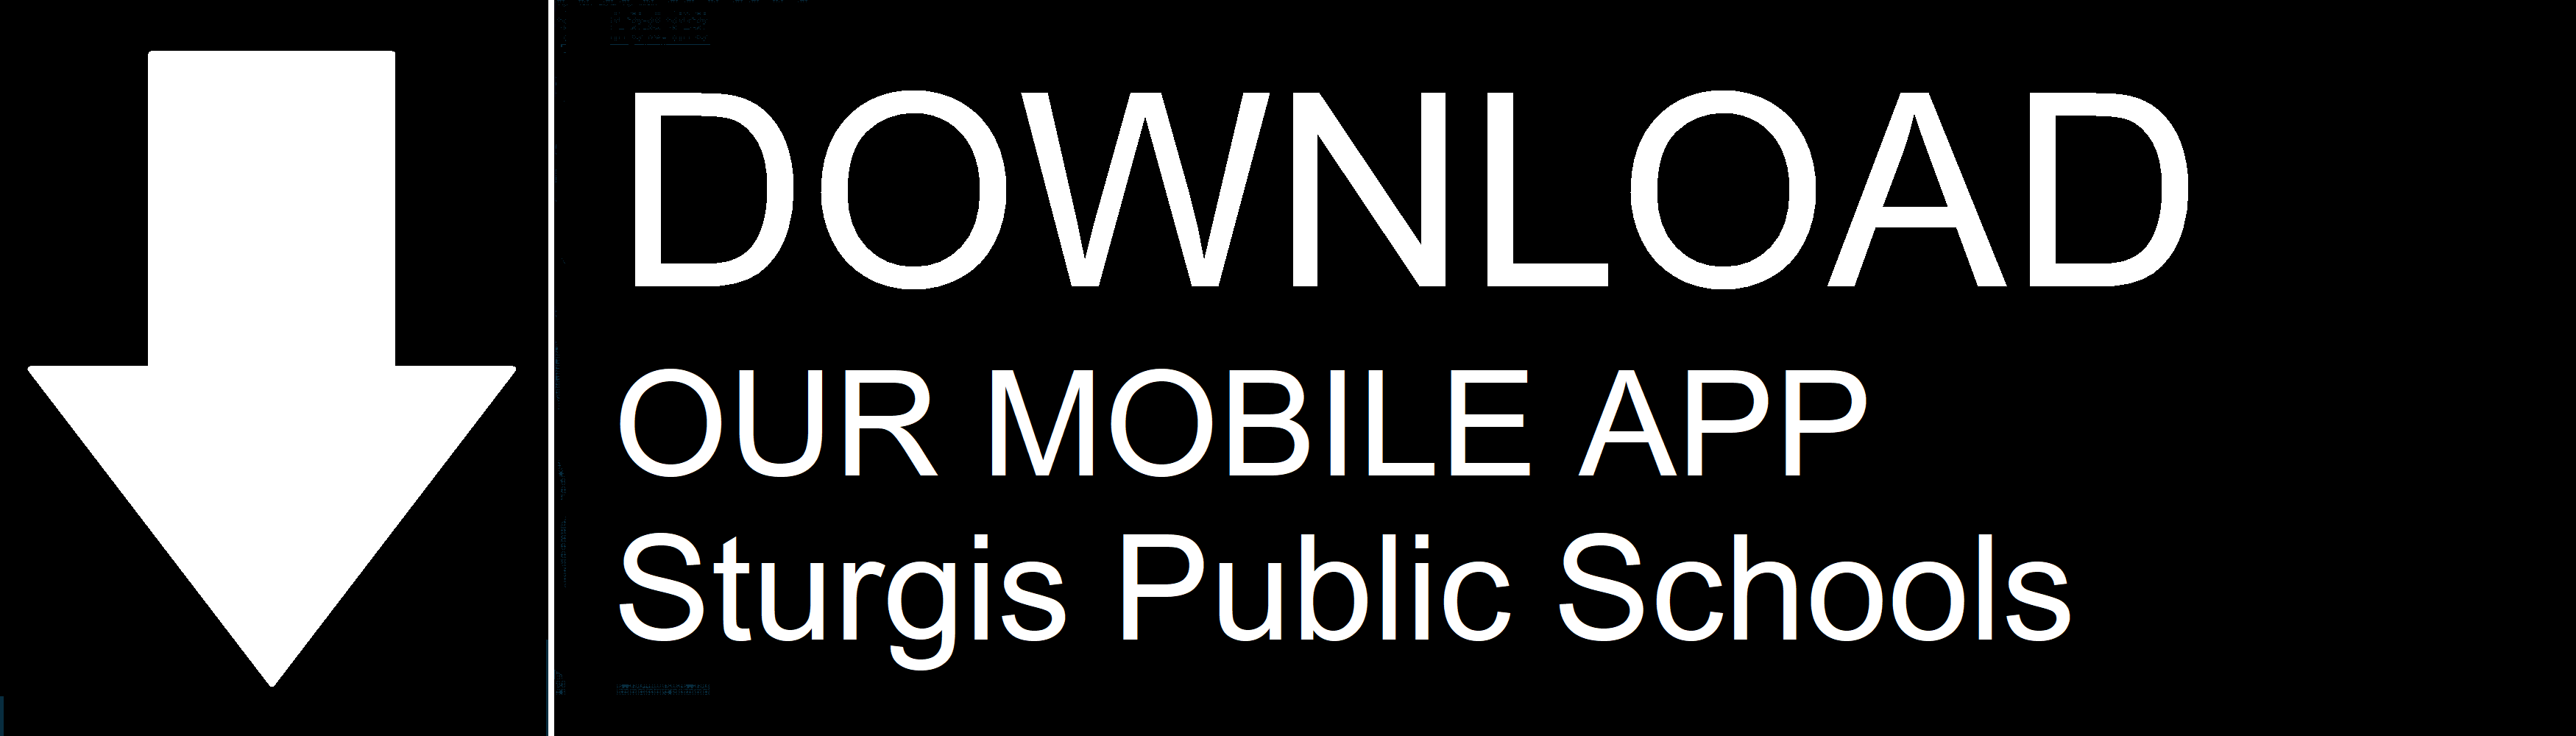 Download our mobile App!